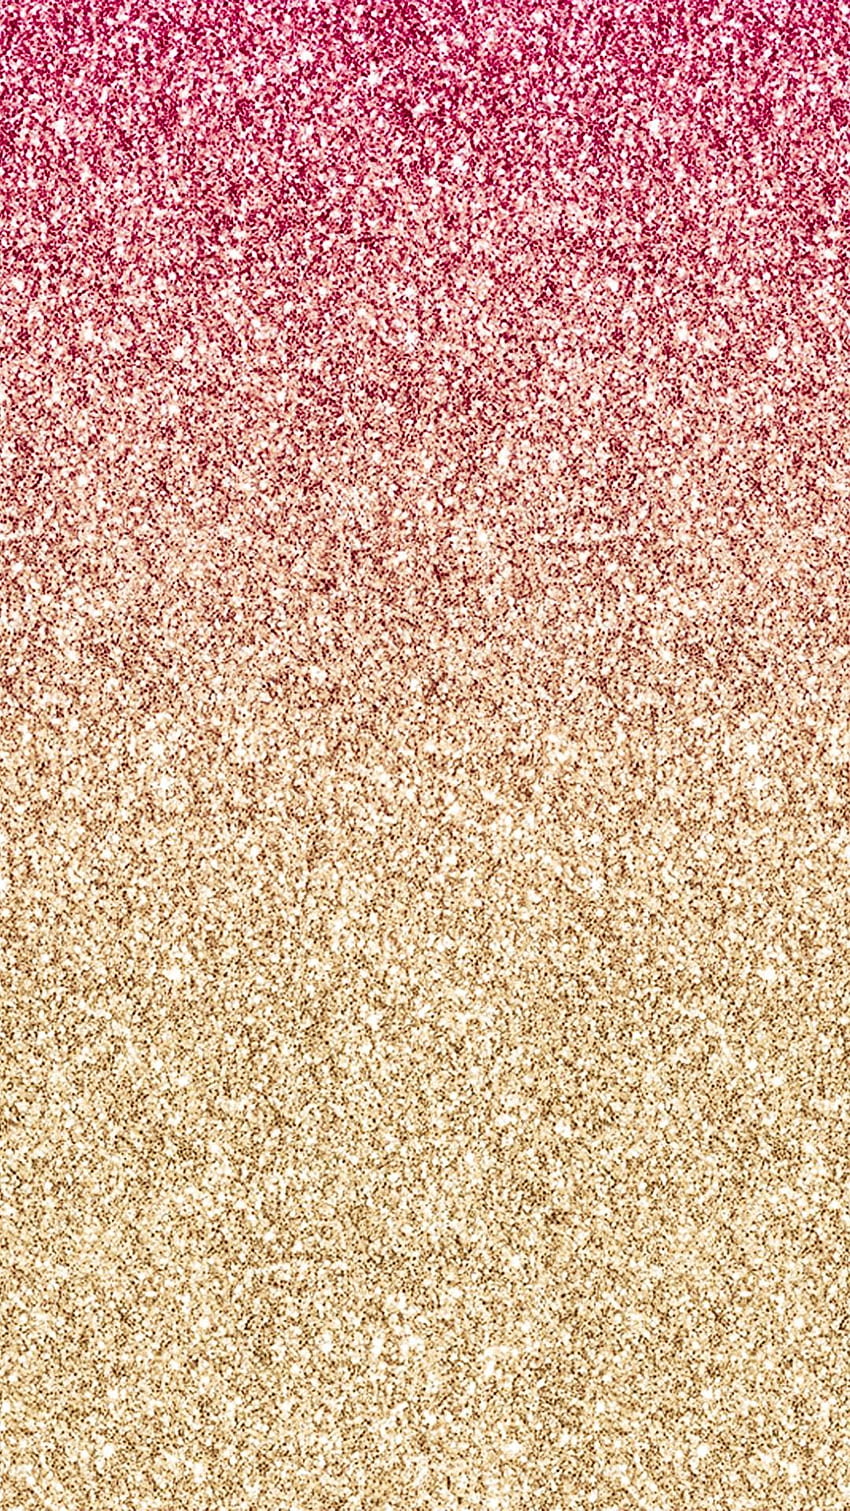 Cute Glitter Rose Gold For Girls. yellow and gold textured iphone glitter iphone, gold glitter background 2020 , pin by streible on phone iphone glitter HD phone wallpaper